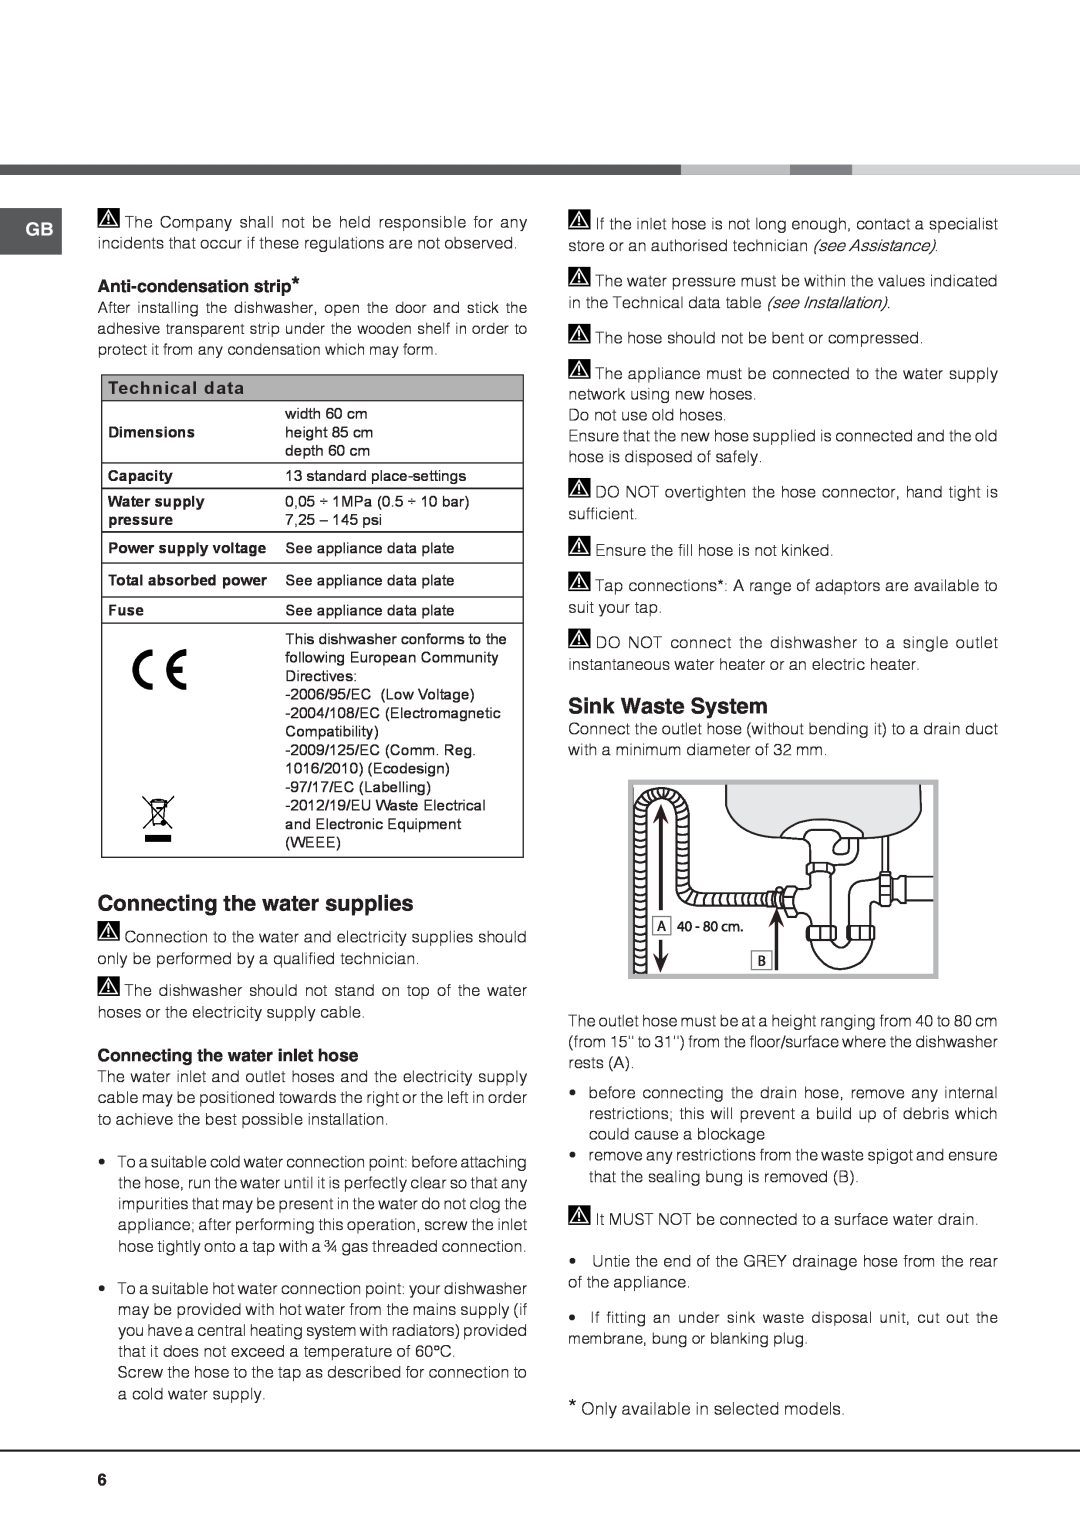 Hotpoint FDFL 11010 manual Connecting the water supplies, Sink Waste System, Anti-condensationstrip, Technical data 